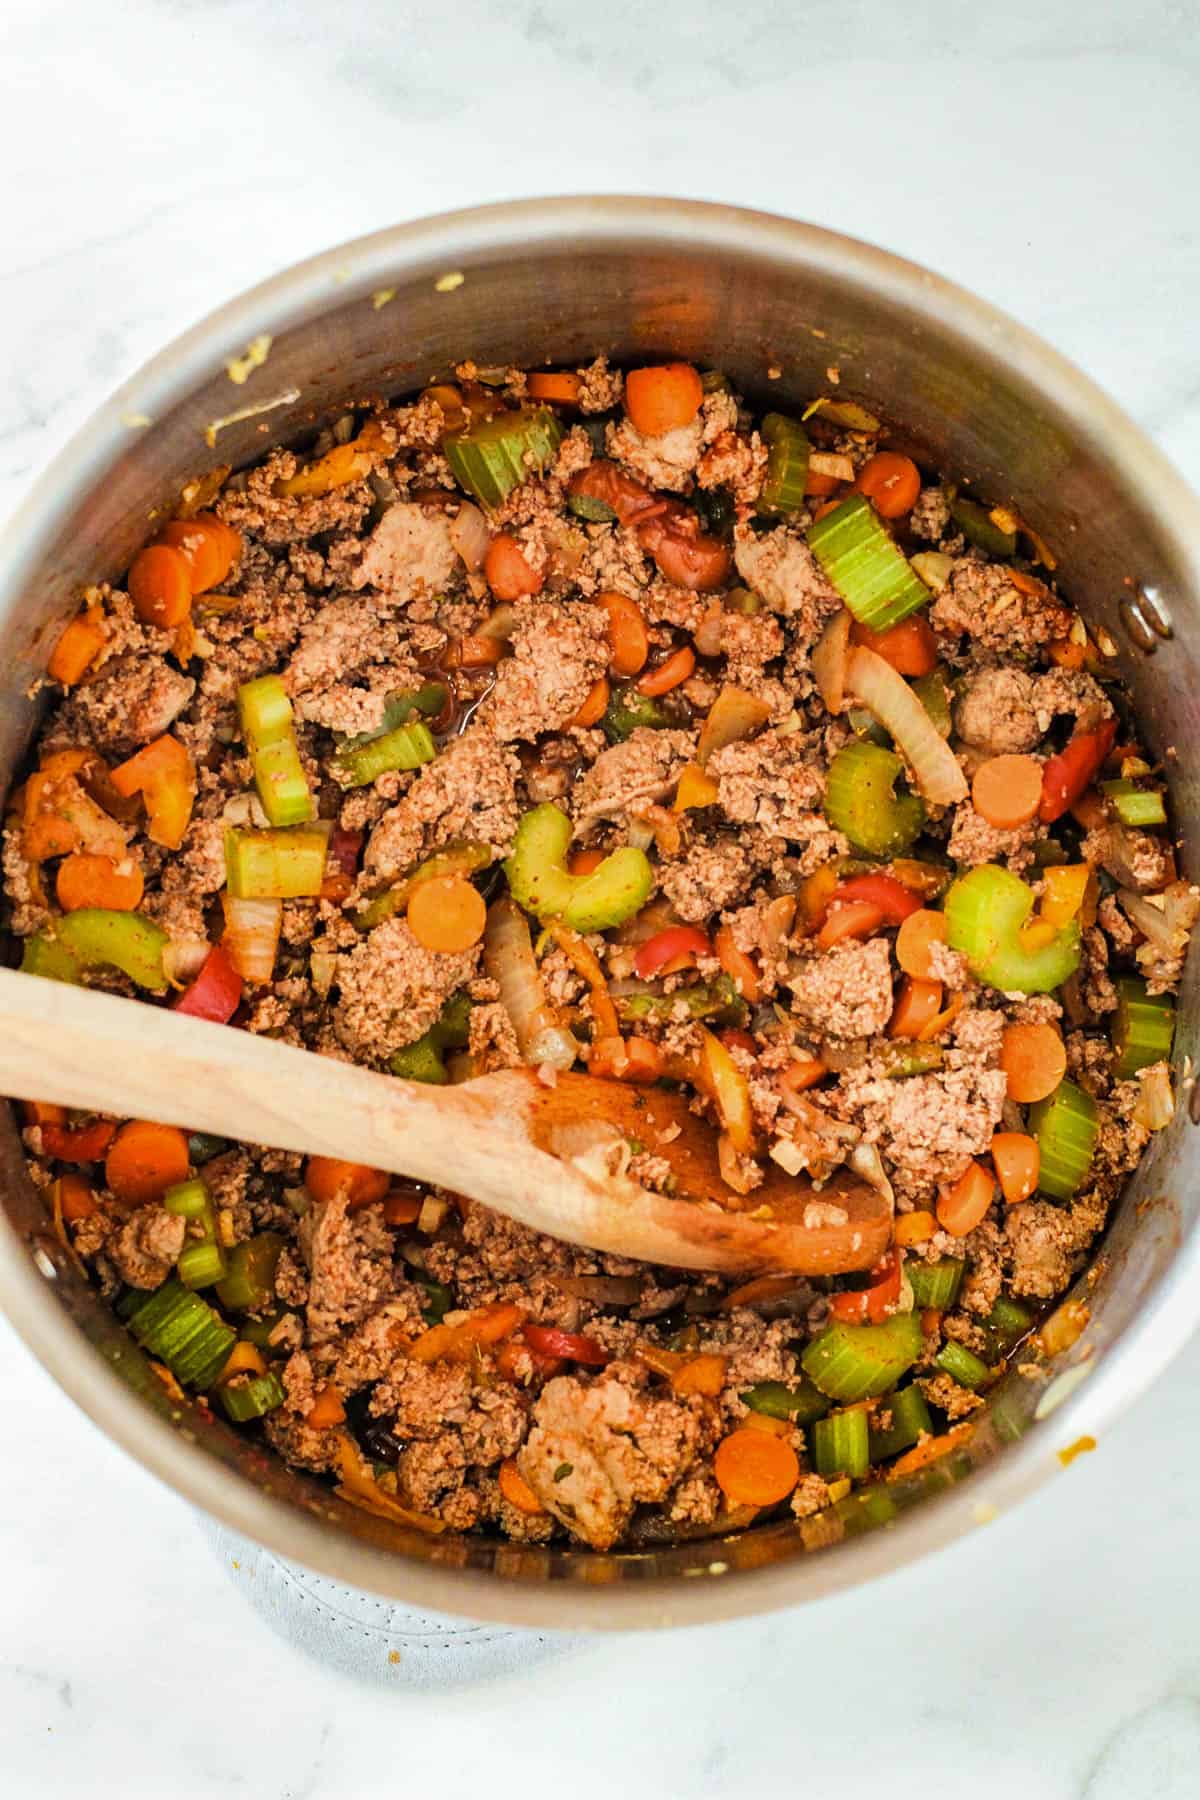 Combining veggies and browned ground turkey in a large pot.